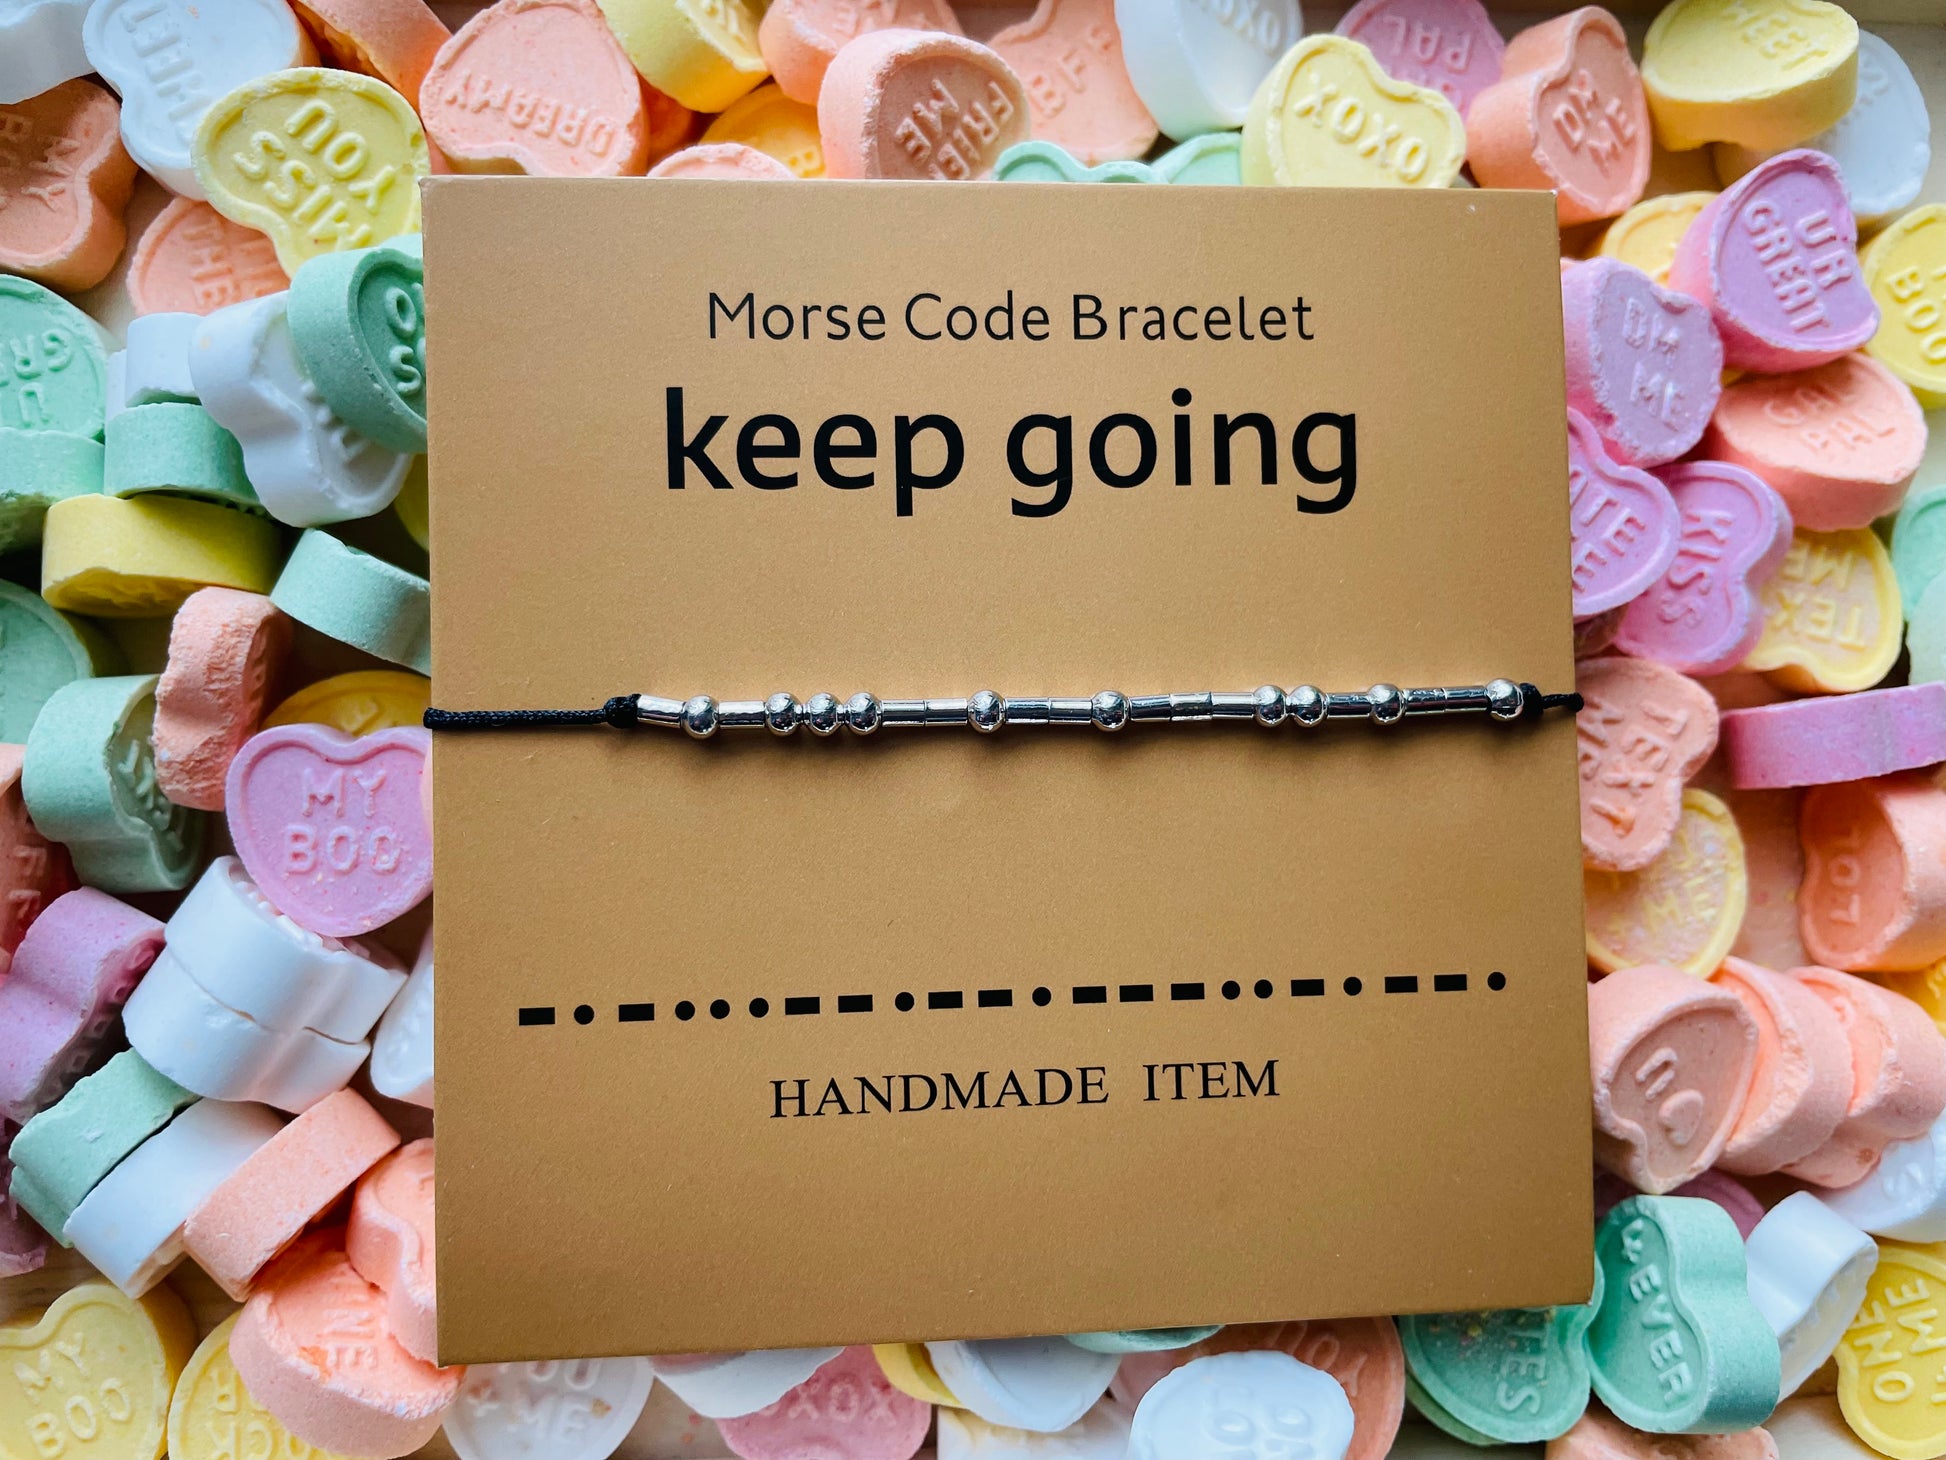 keep going bracelet on candy hearts